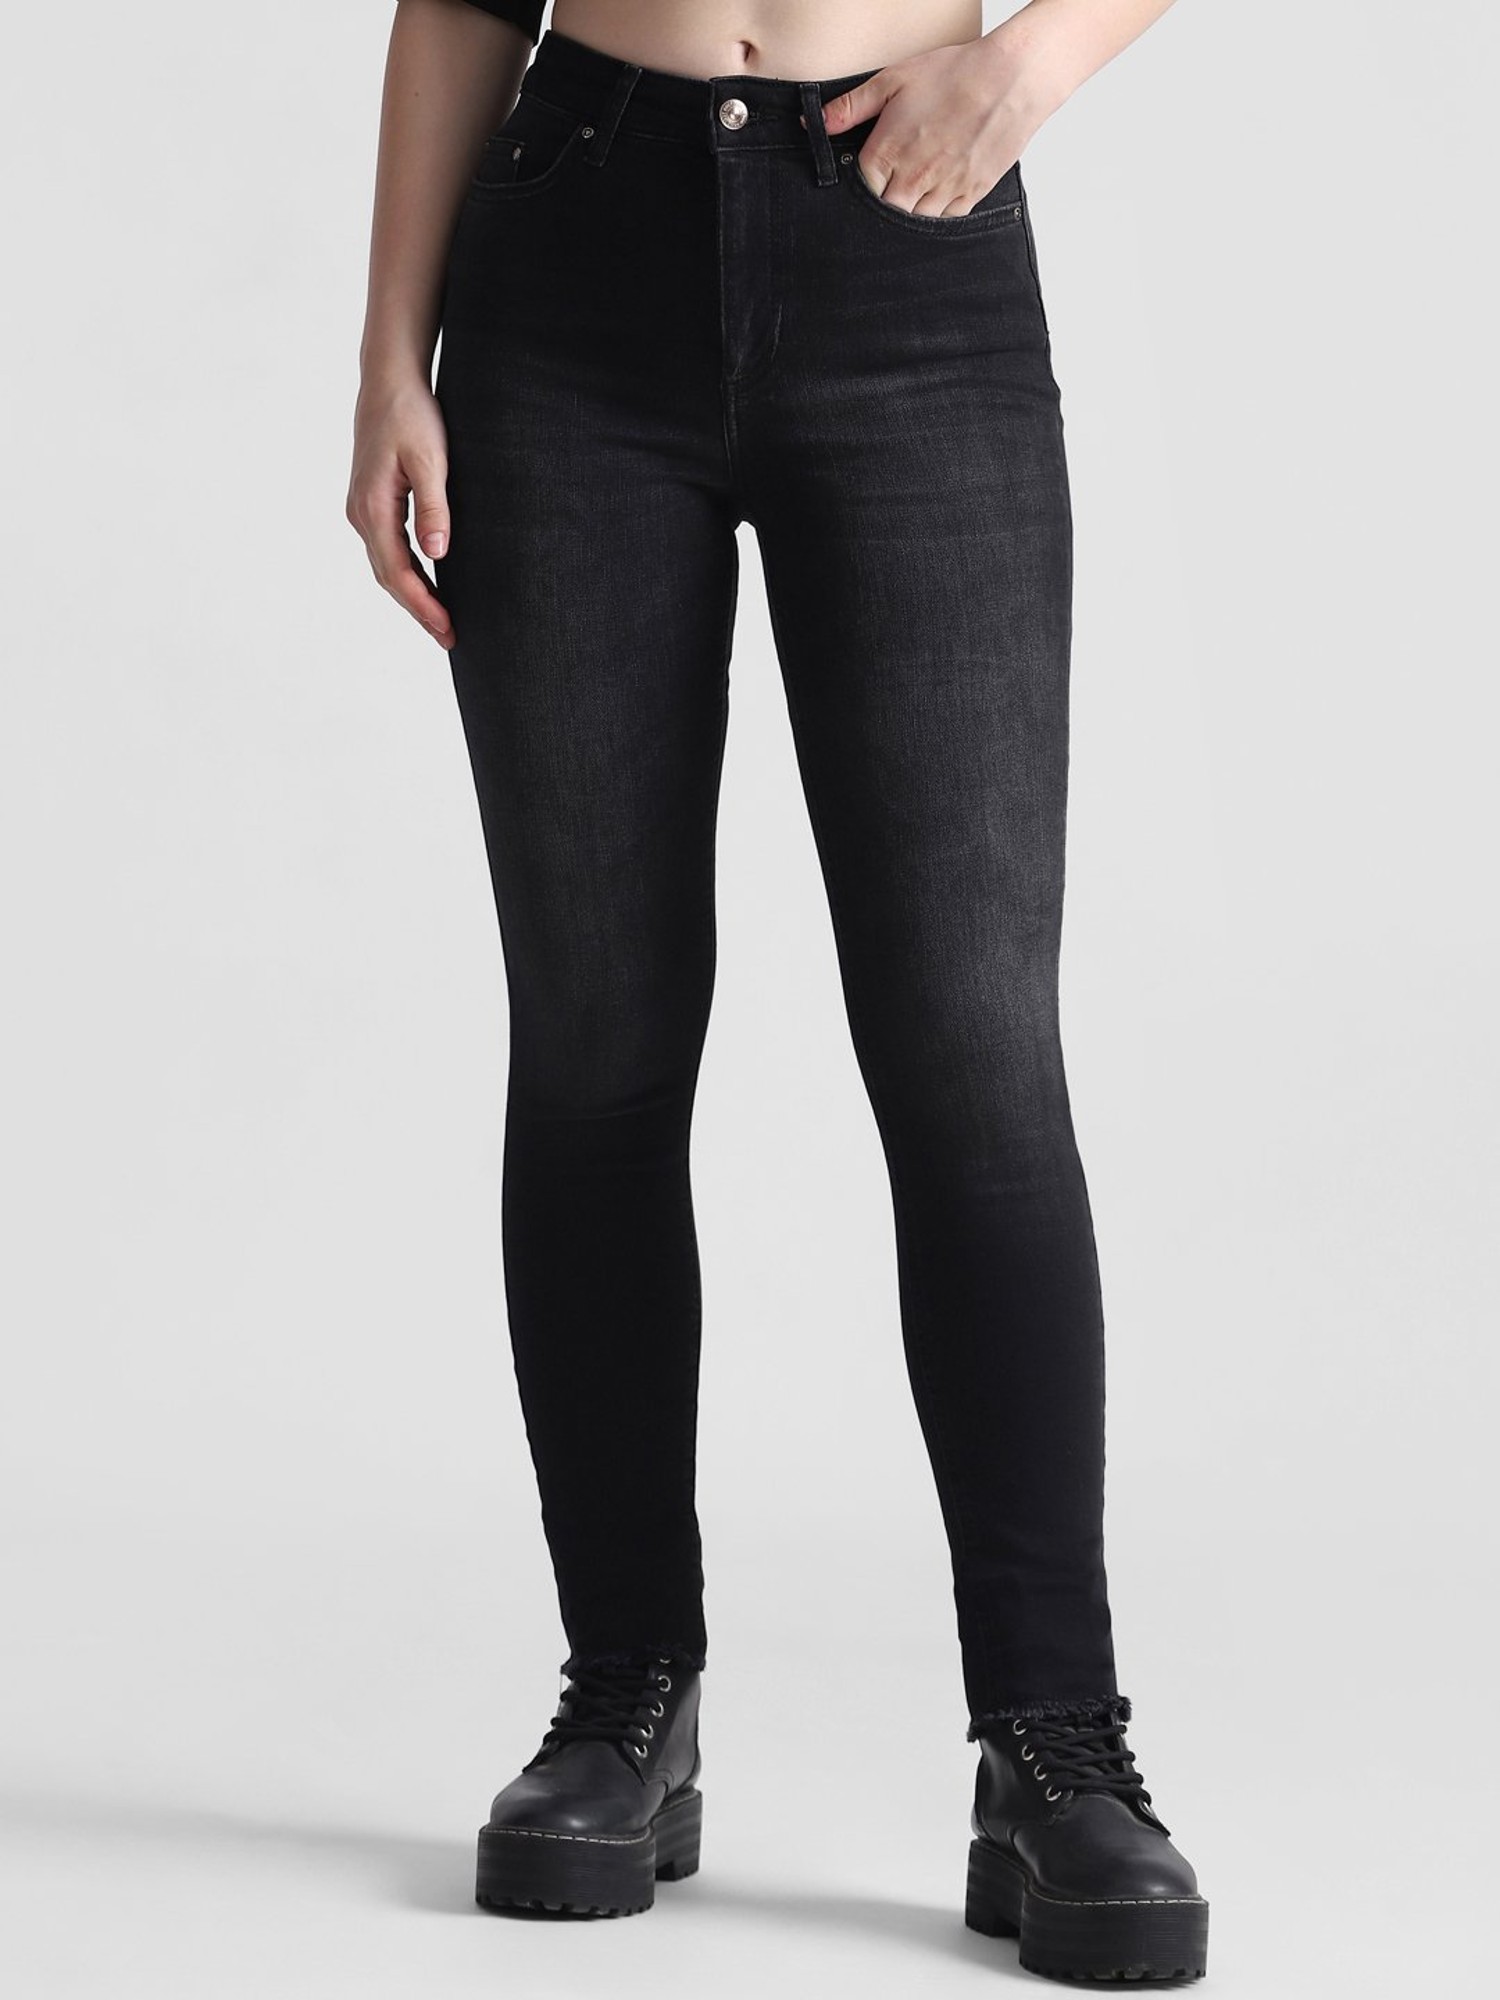 Buy LIFE Black Skinny Fit Ankle Length Cotton Lycra Women's Jeans |  Shoppers Stop